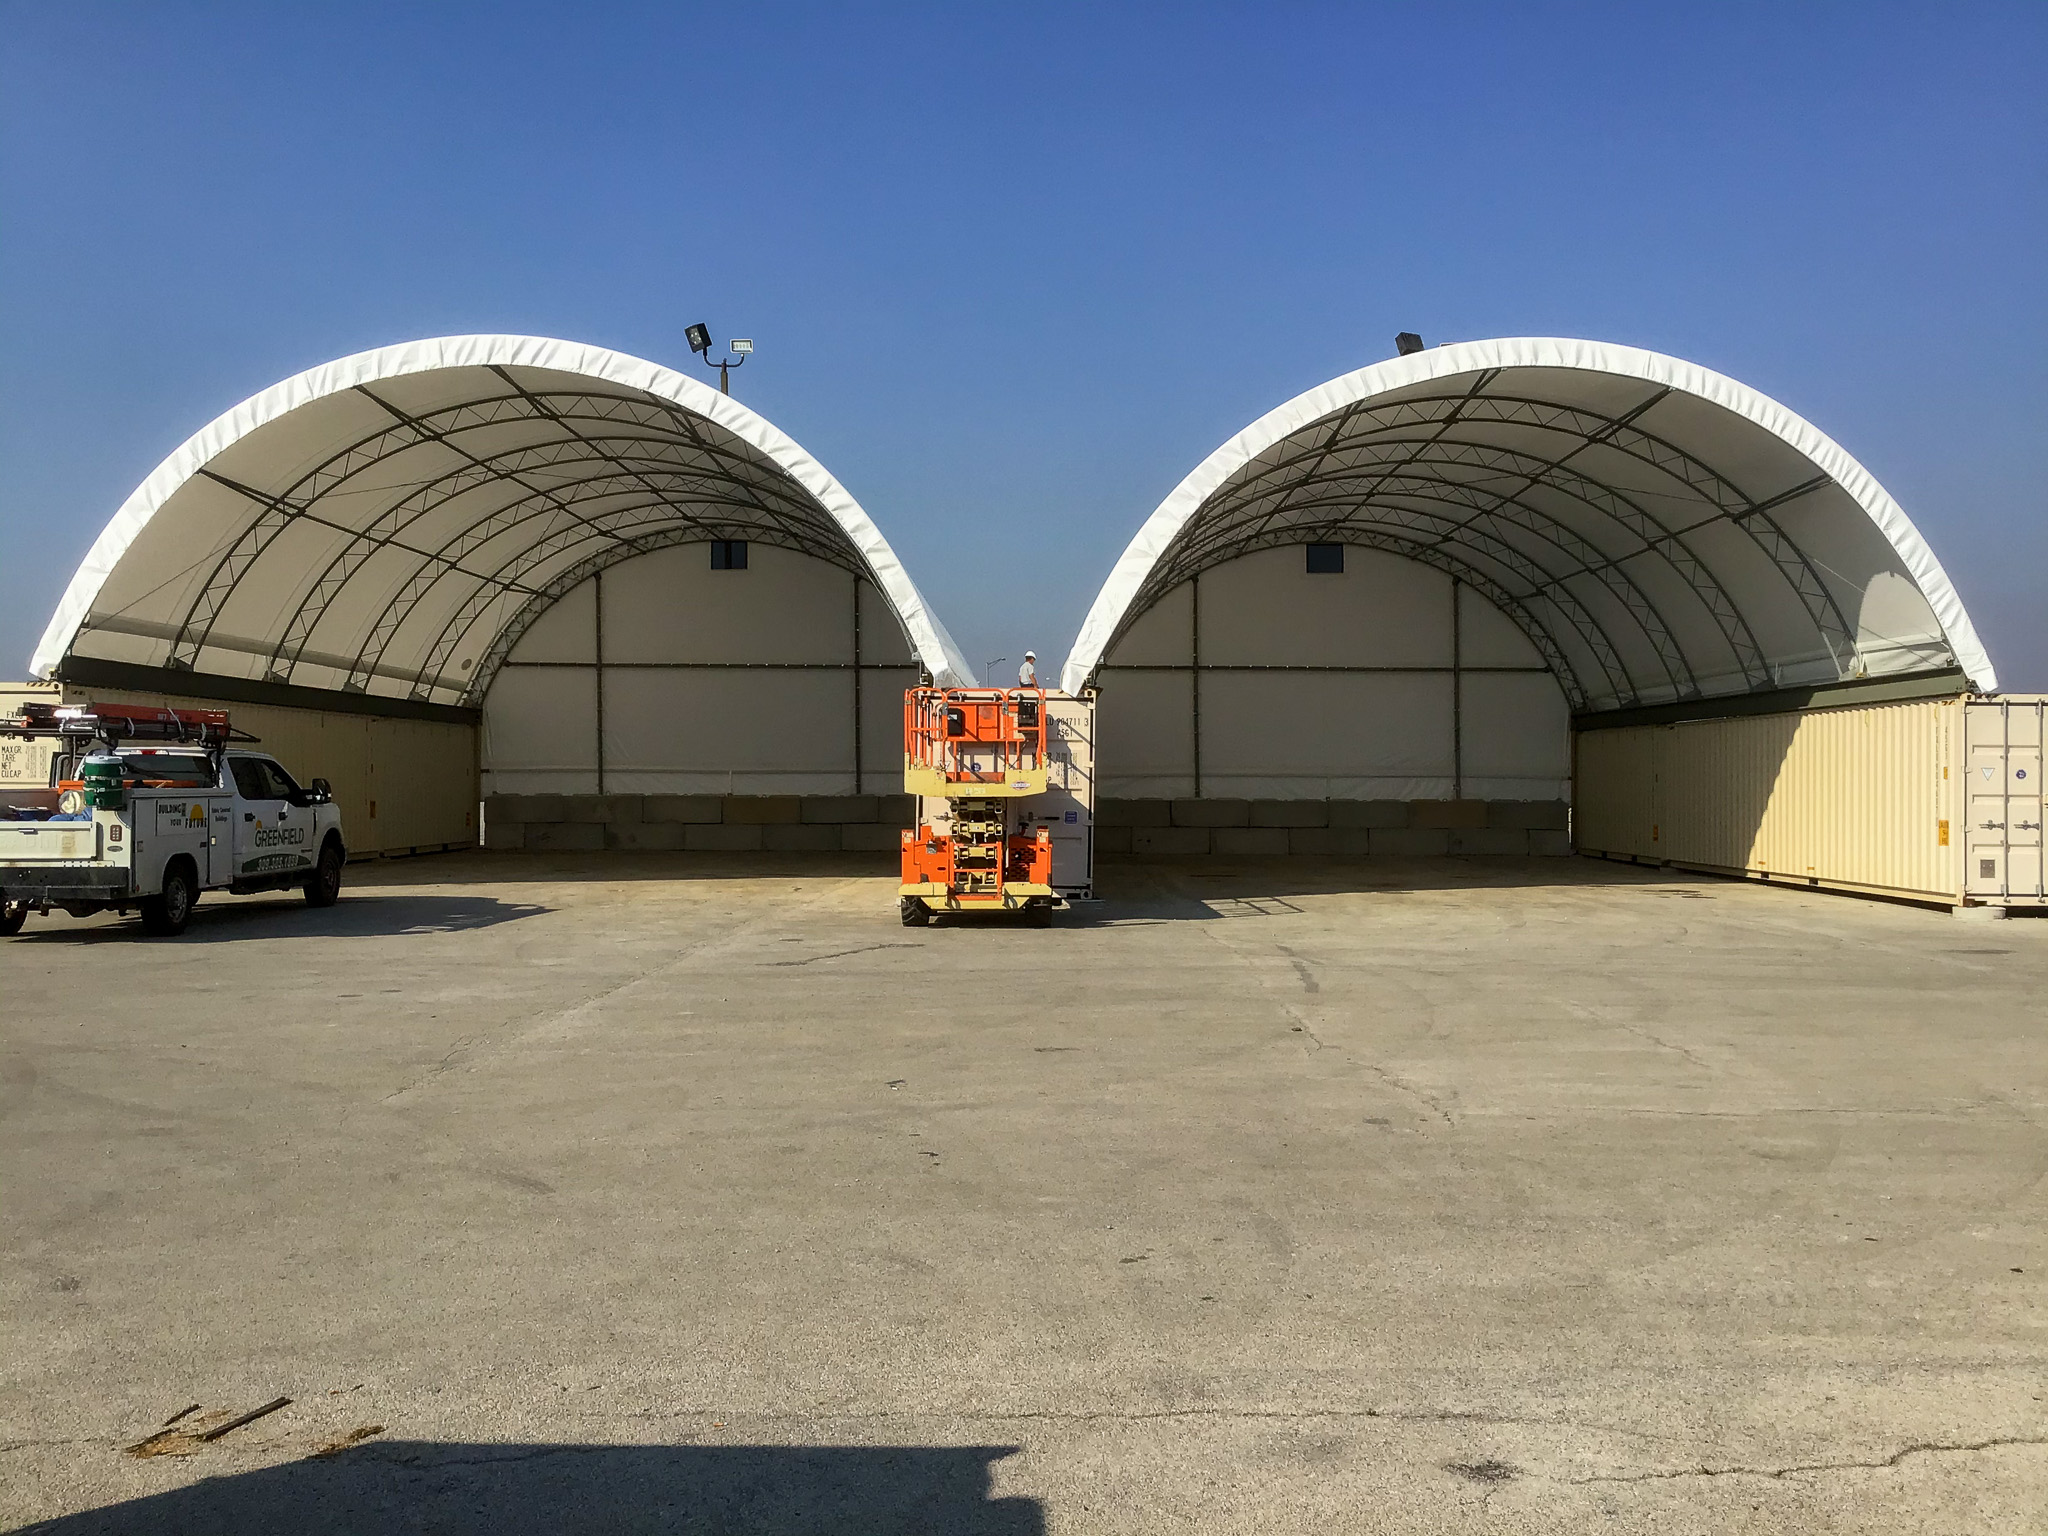 Two portable fabric structures are seen. Greenfield Contractors builds Portable Buildings in Bettendorf IA.